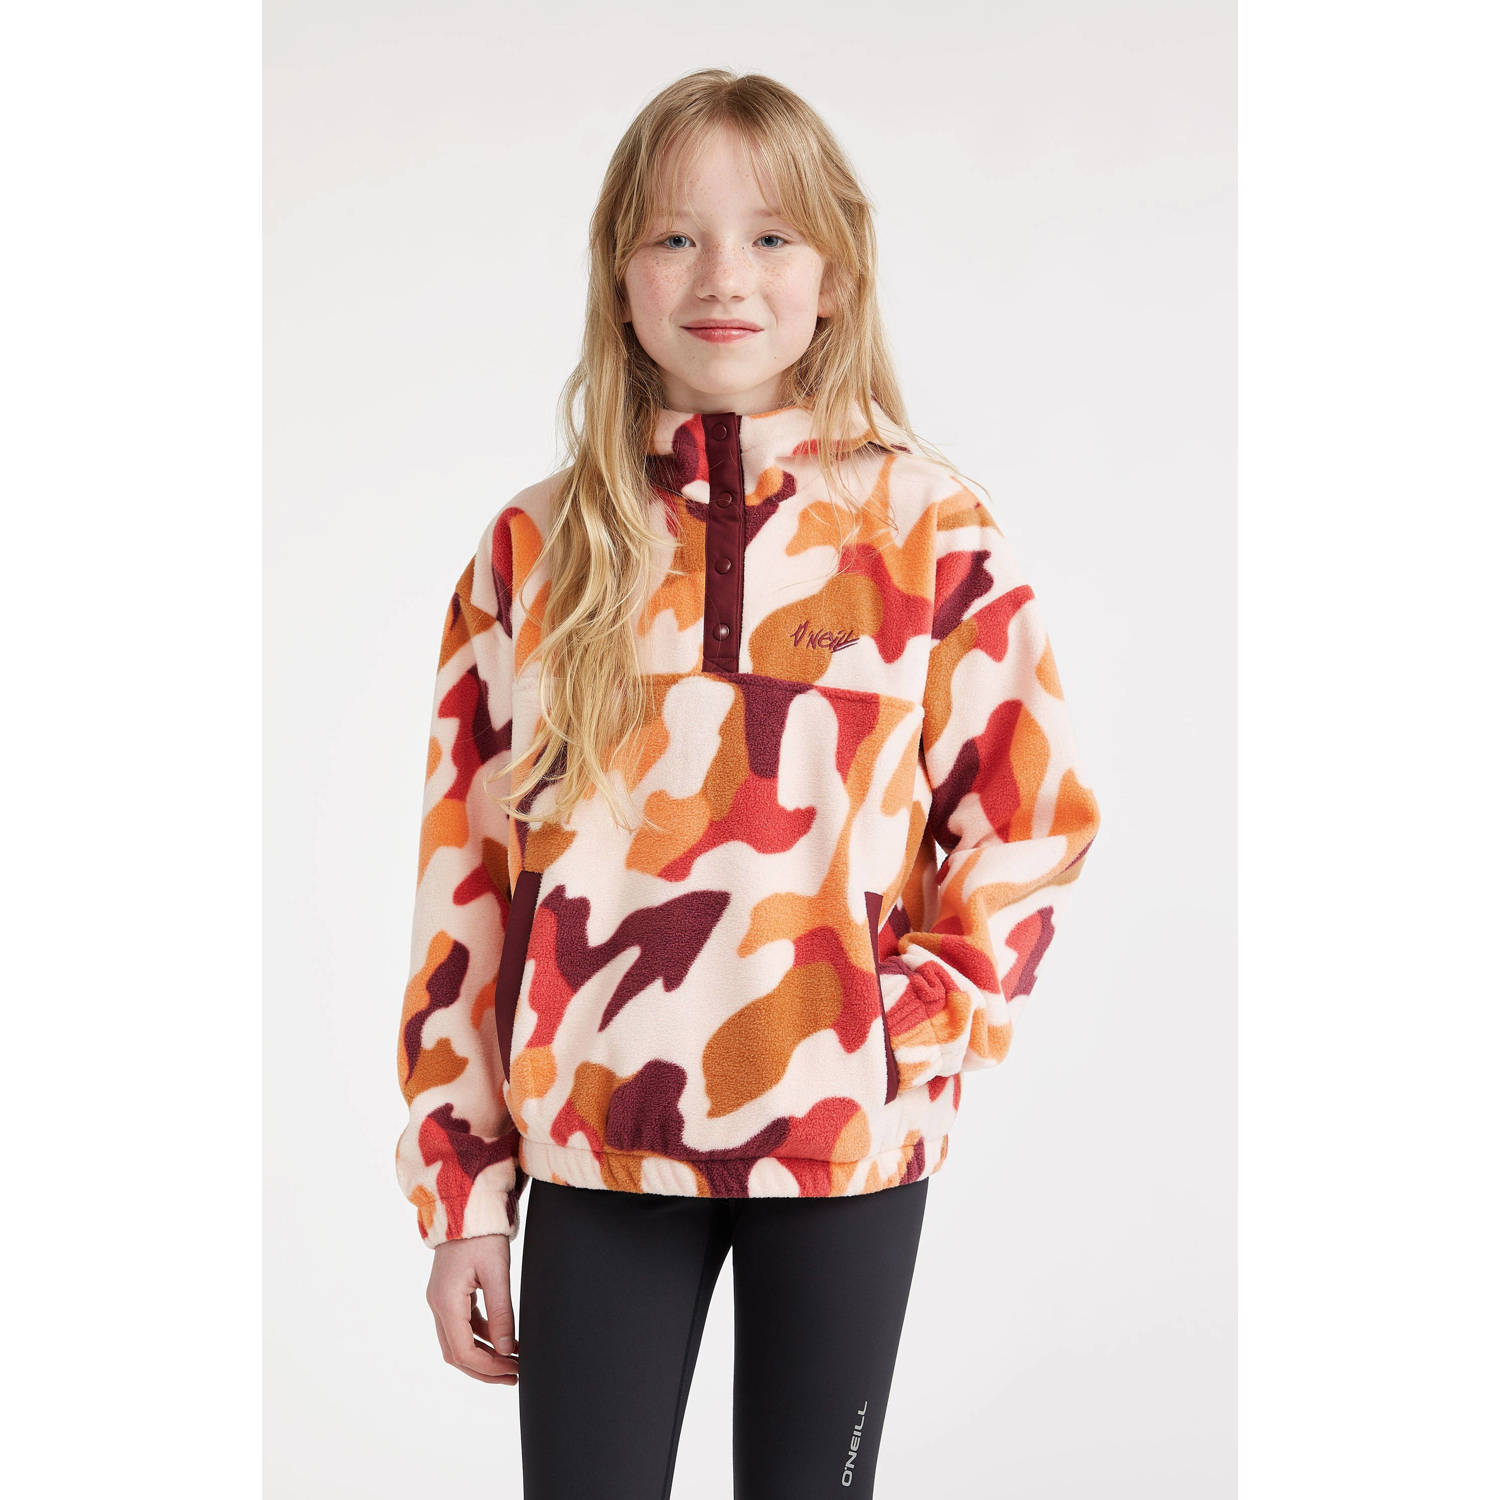 O'Neill skipully Superfleece paars roze oranje All over print 128